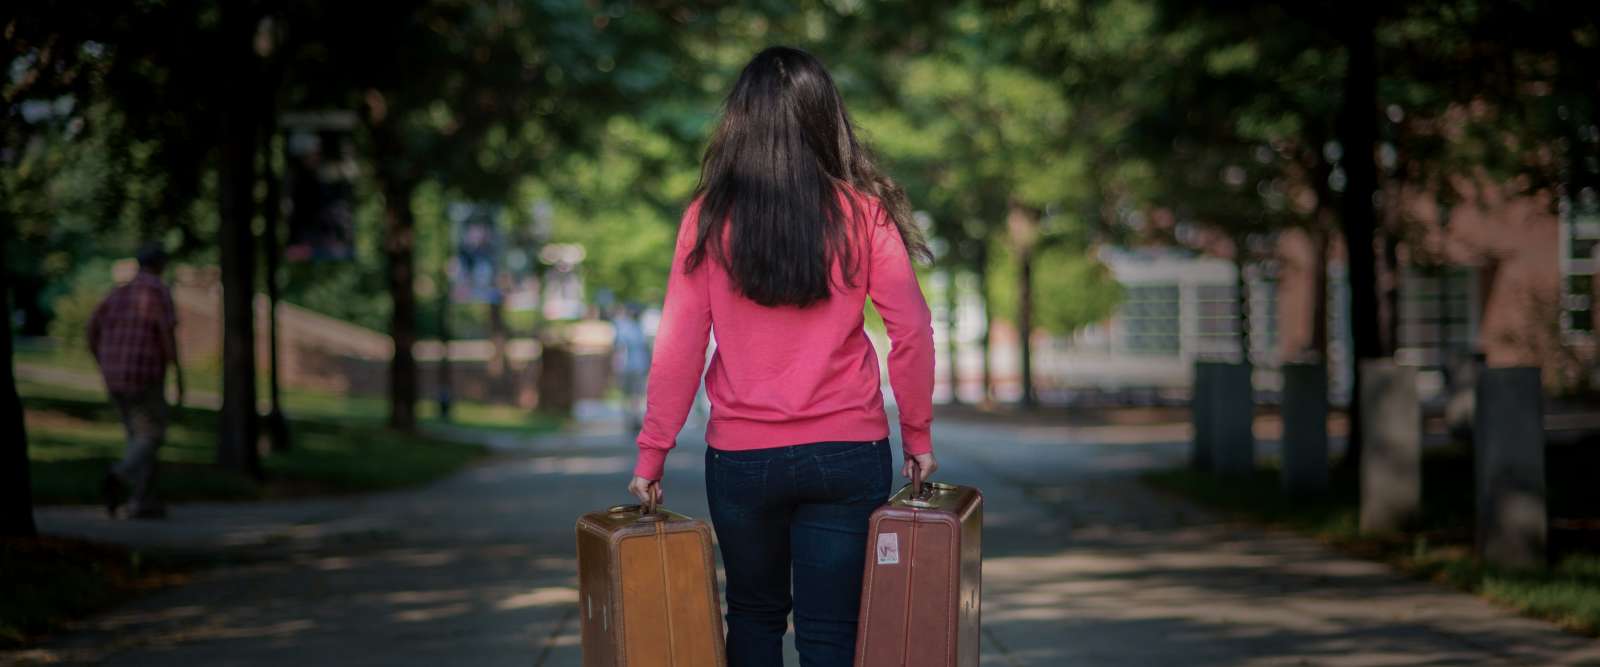 Student with luggage